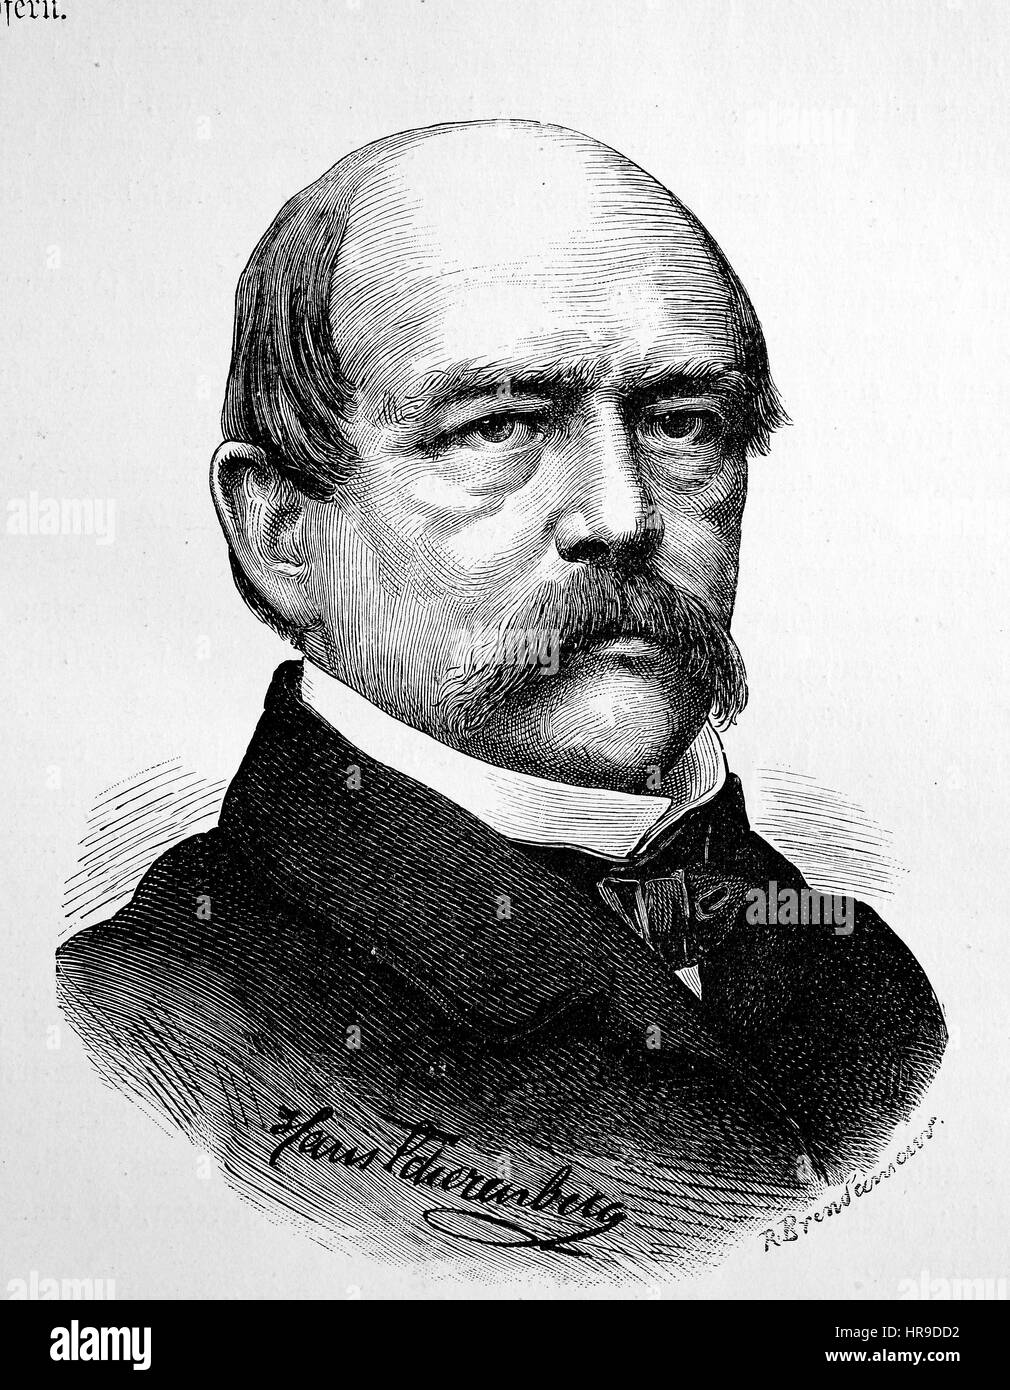 Otto Eduard Leopold, Prince of Bismarck, Duke of Lauenburg, 1815 - 1898, known as Otto von Bismarck, was a conservative Prussian statesman who dominated German and European affairs from the 1860s until 1890. In the 1860s, he engineered a series of wars that unified the German states, Situation from the time of The Franco-Prussian War or Franco-German War,  Deutsch-Franzoesischer Krieg, 1870-1871, Reproduction of an original woodcut from the year 1885, digital improved Stock Photo